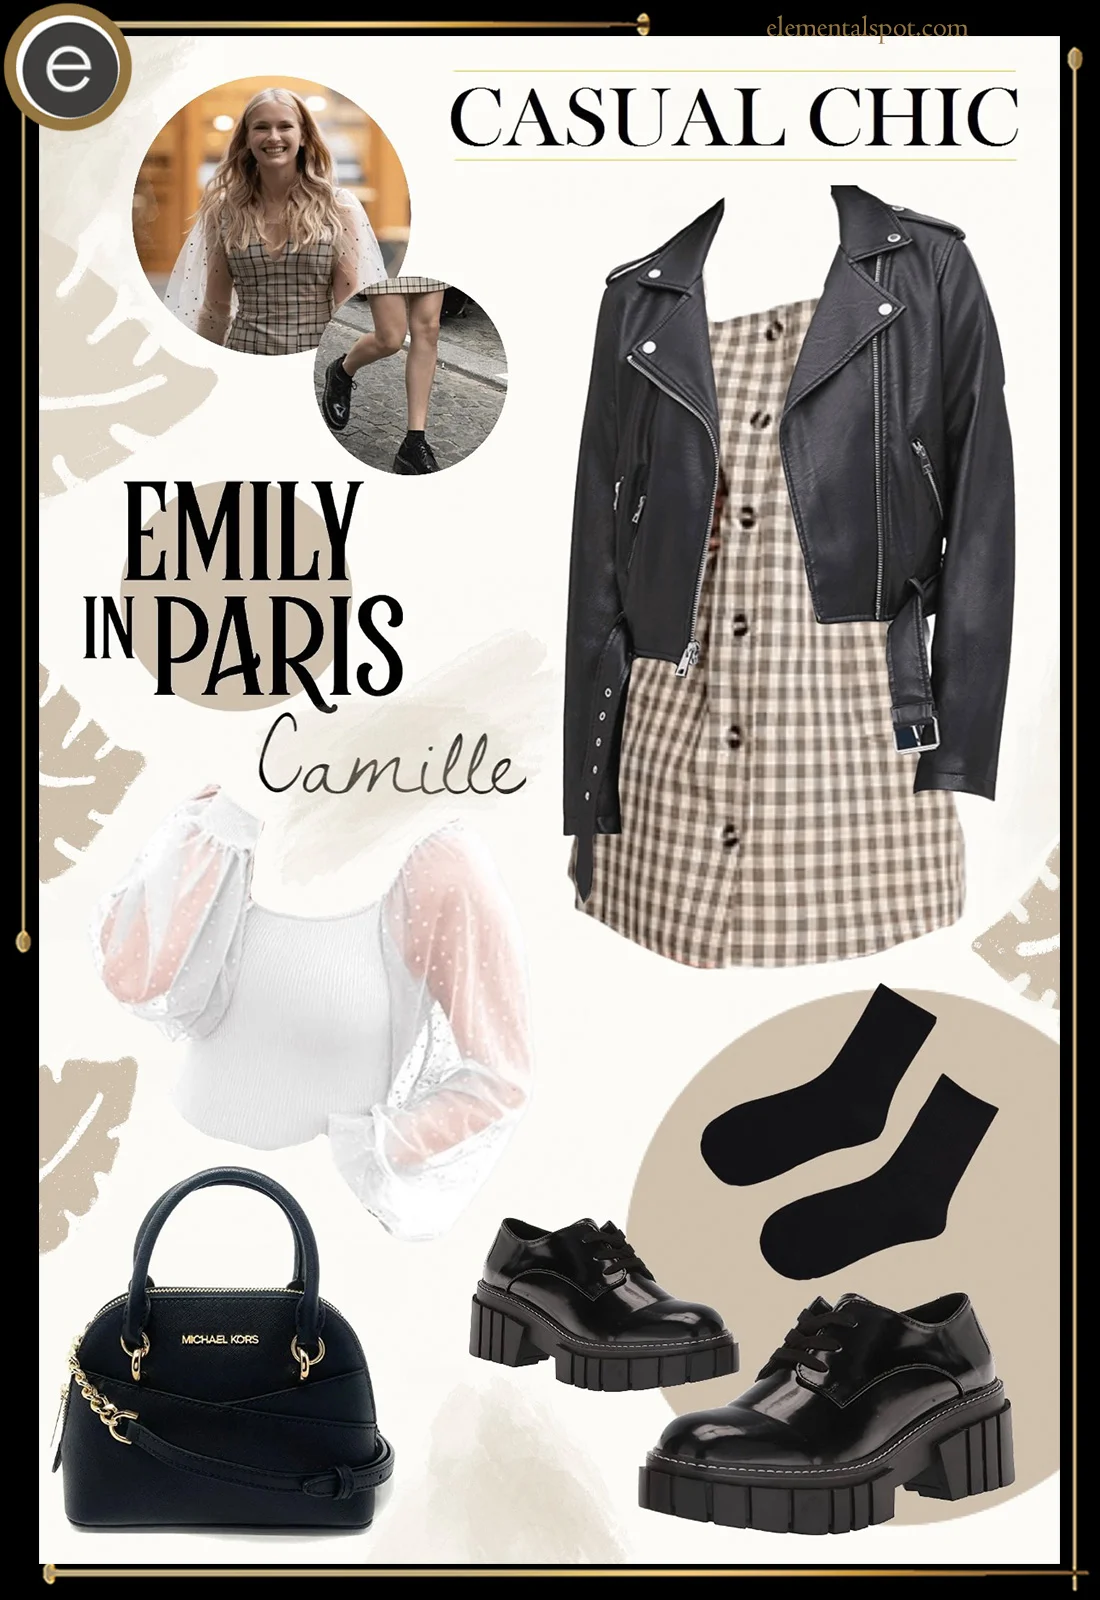 emily in paris outfits camille